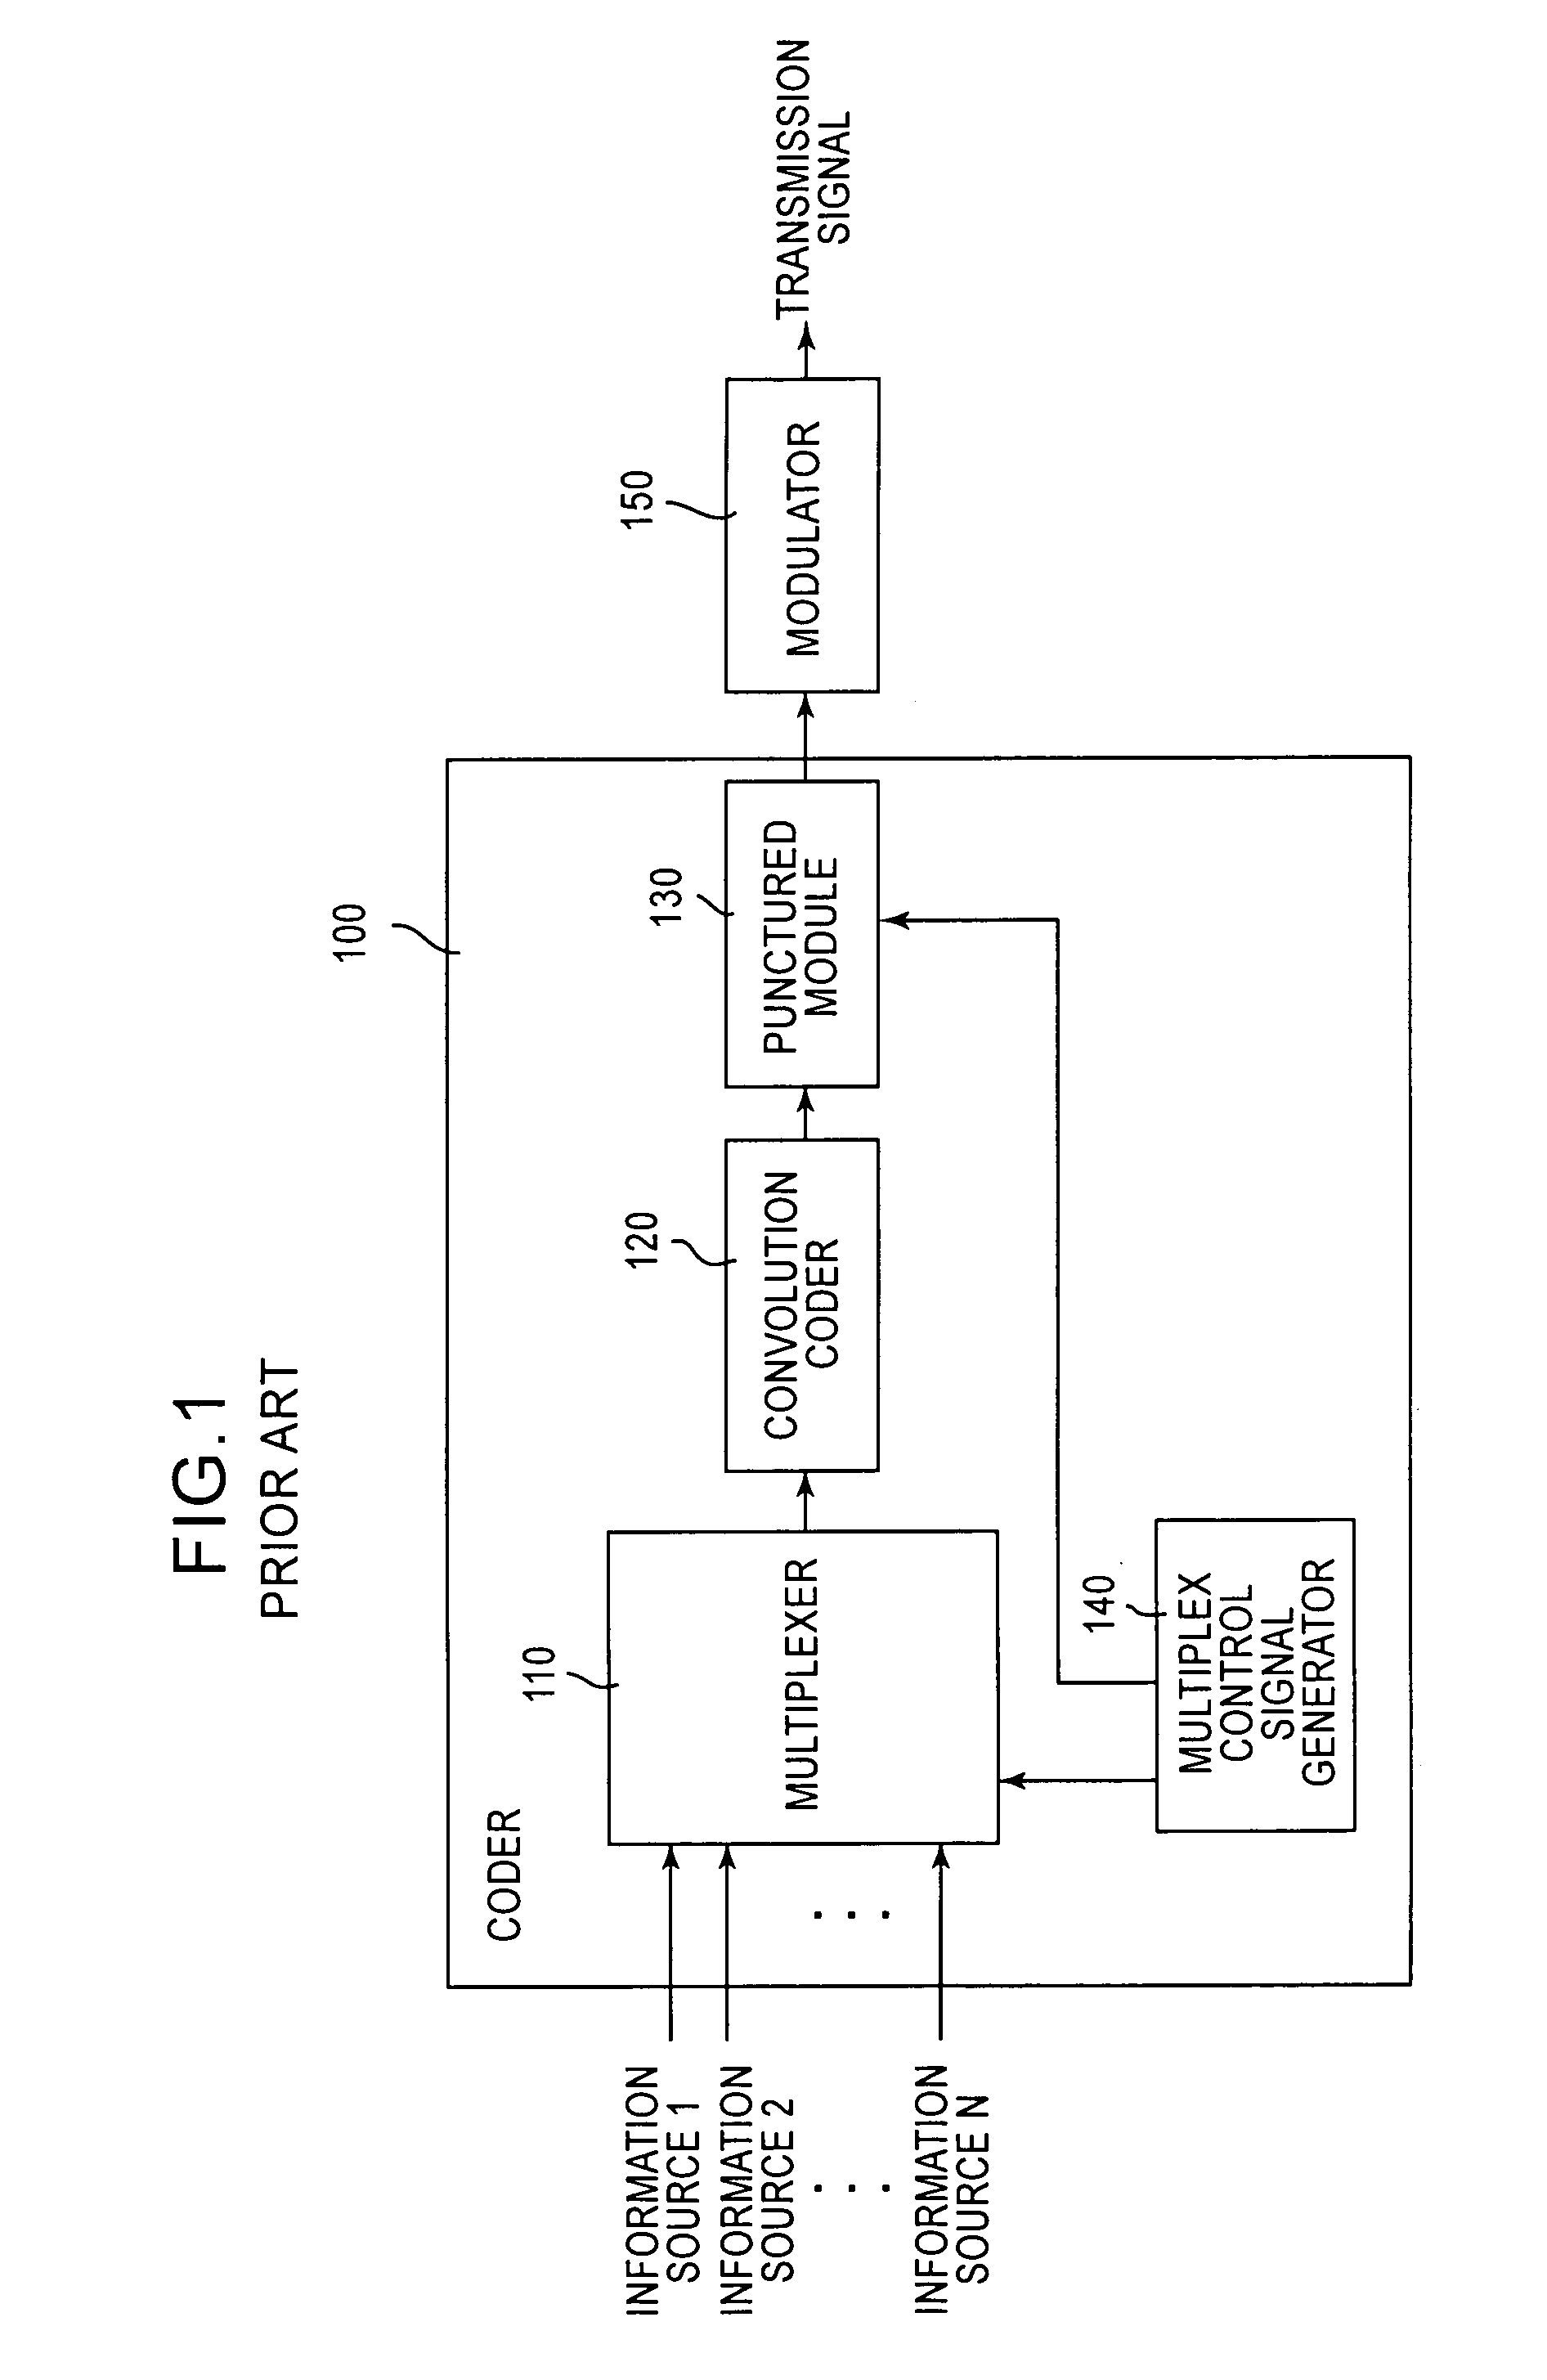 Method and apparatus for decoding received data in a communications system